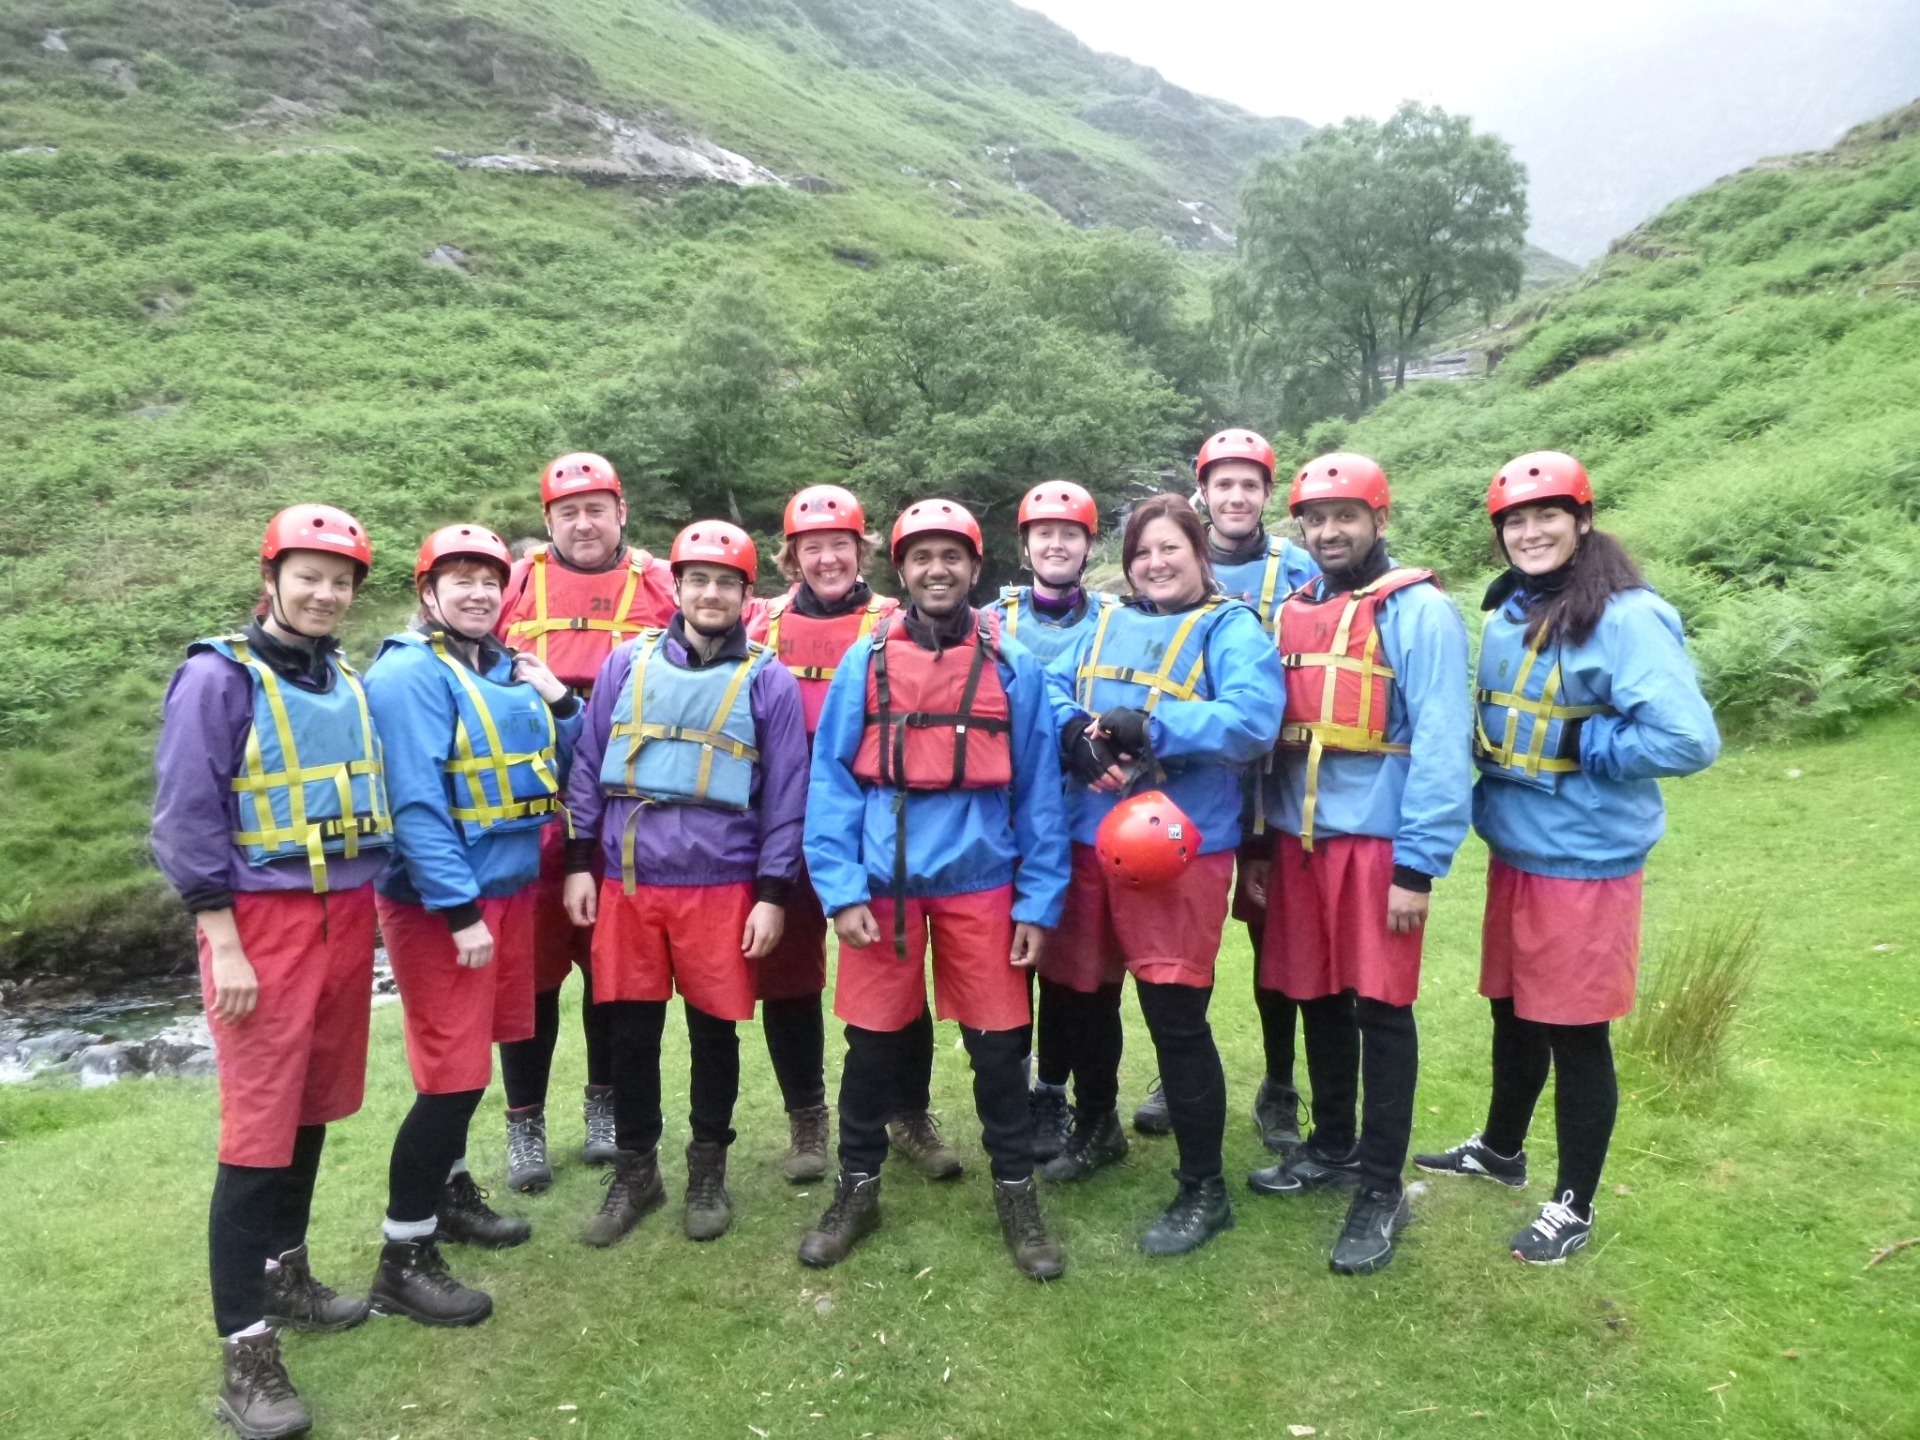 A team of teachers in buoyancy aids, helmets and water proofs